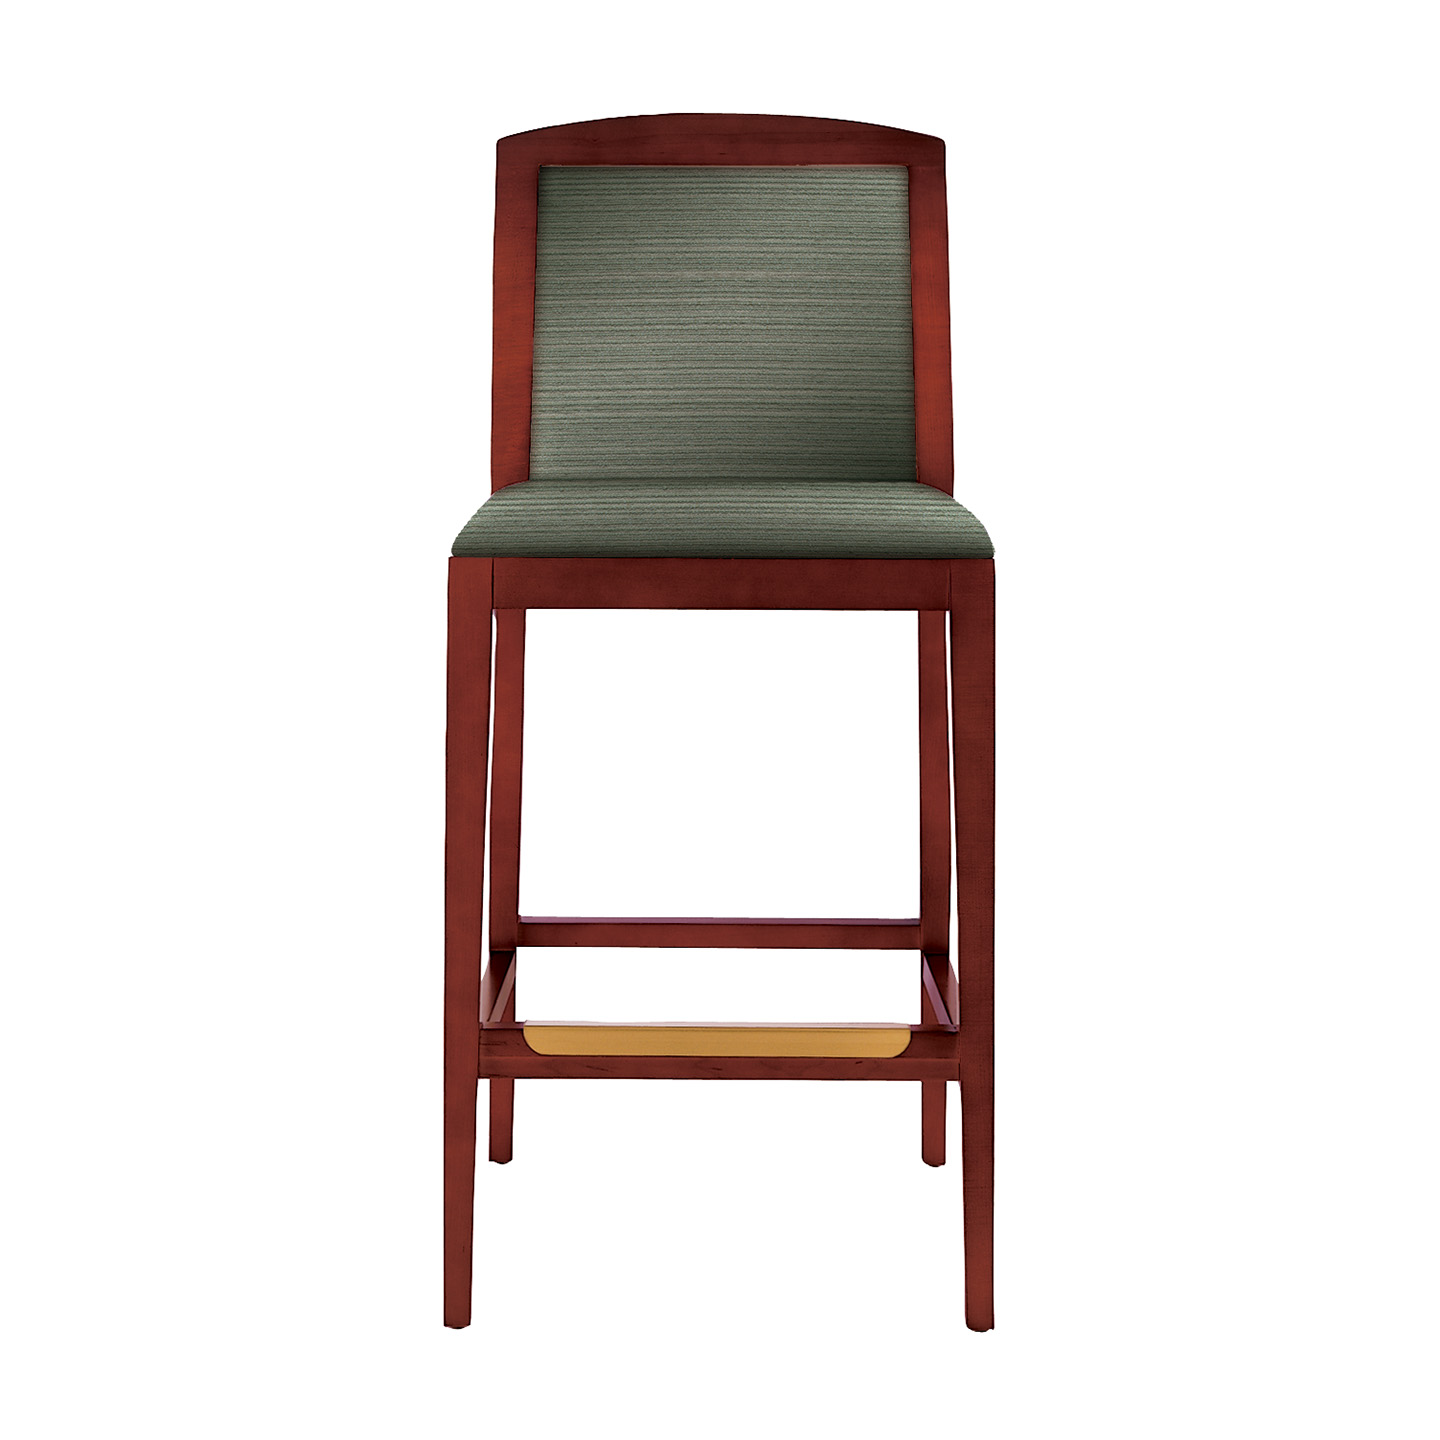 Haworth Composites stool in green fabric and dark wood body and legs